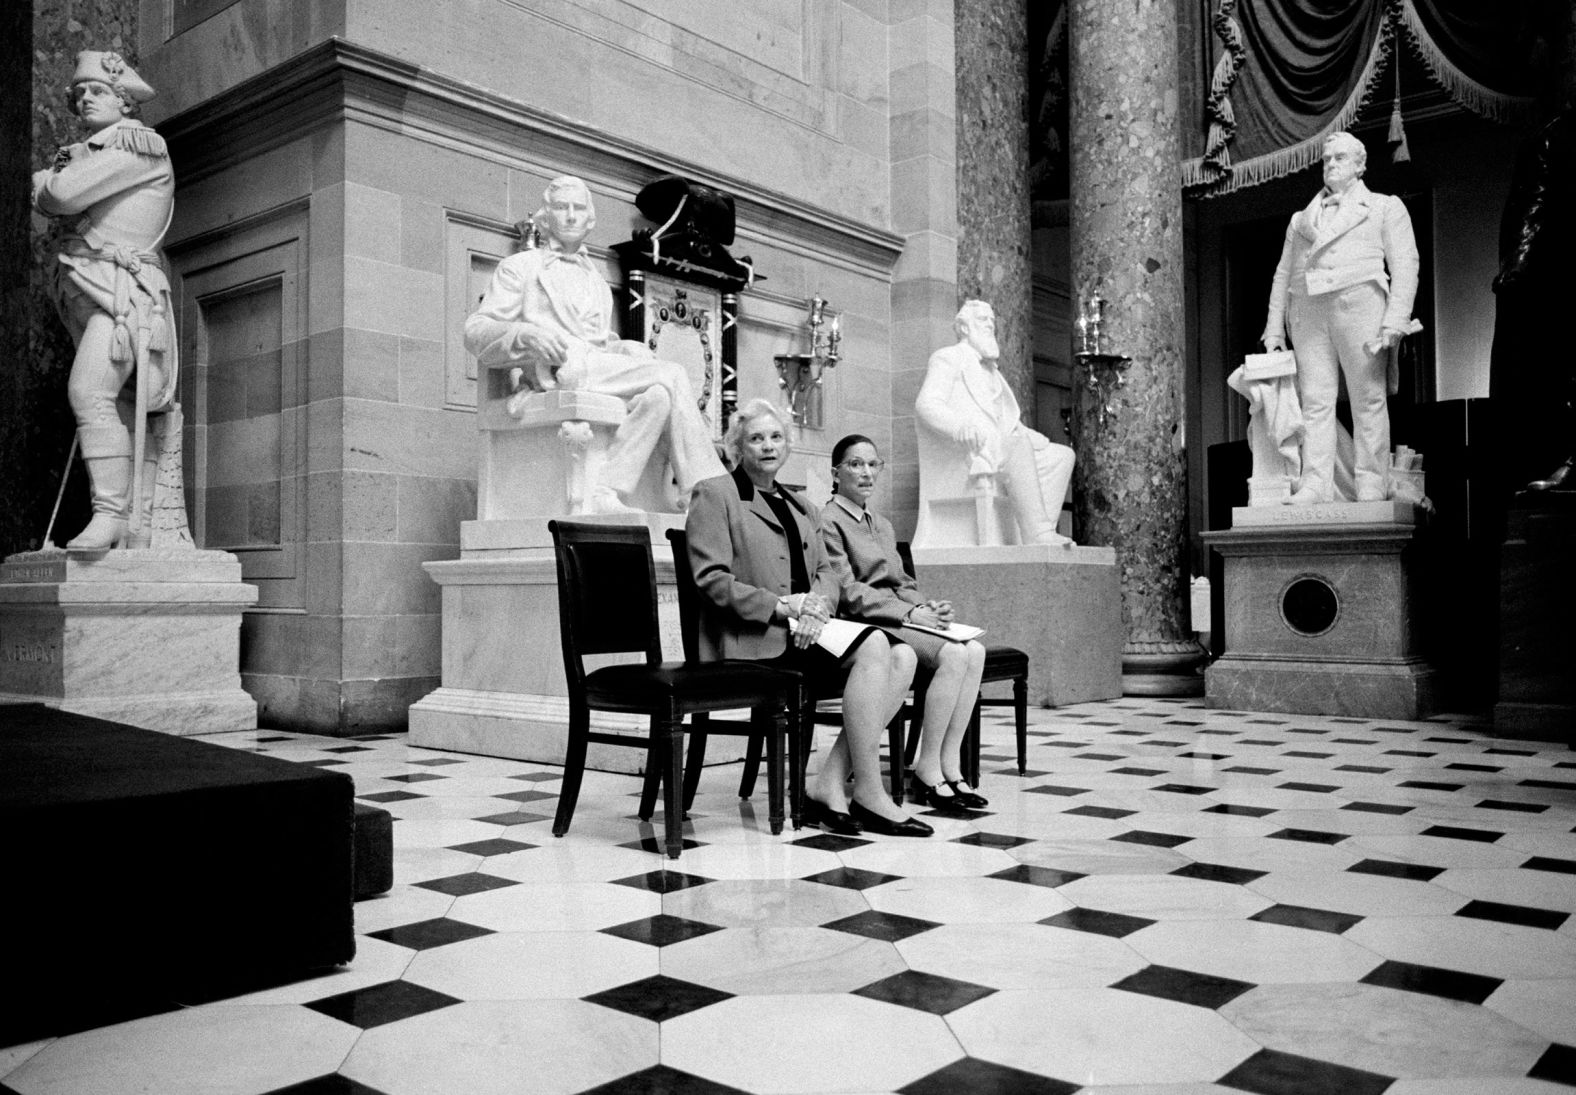 O'Connor and fellow Supreme Court Justice Ruth Bader Ginsburg are surrounded by statues of men as they pose together at the US Capitol in 2001.